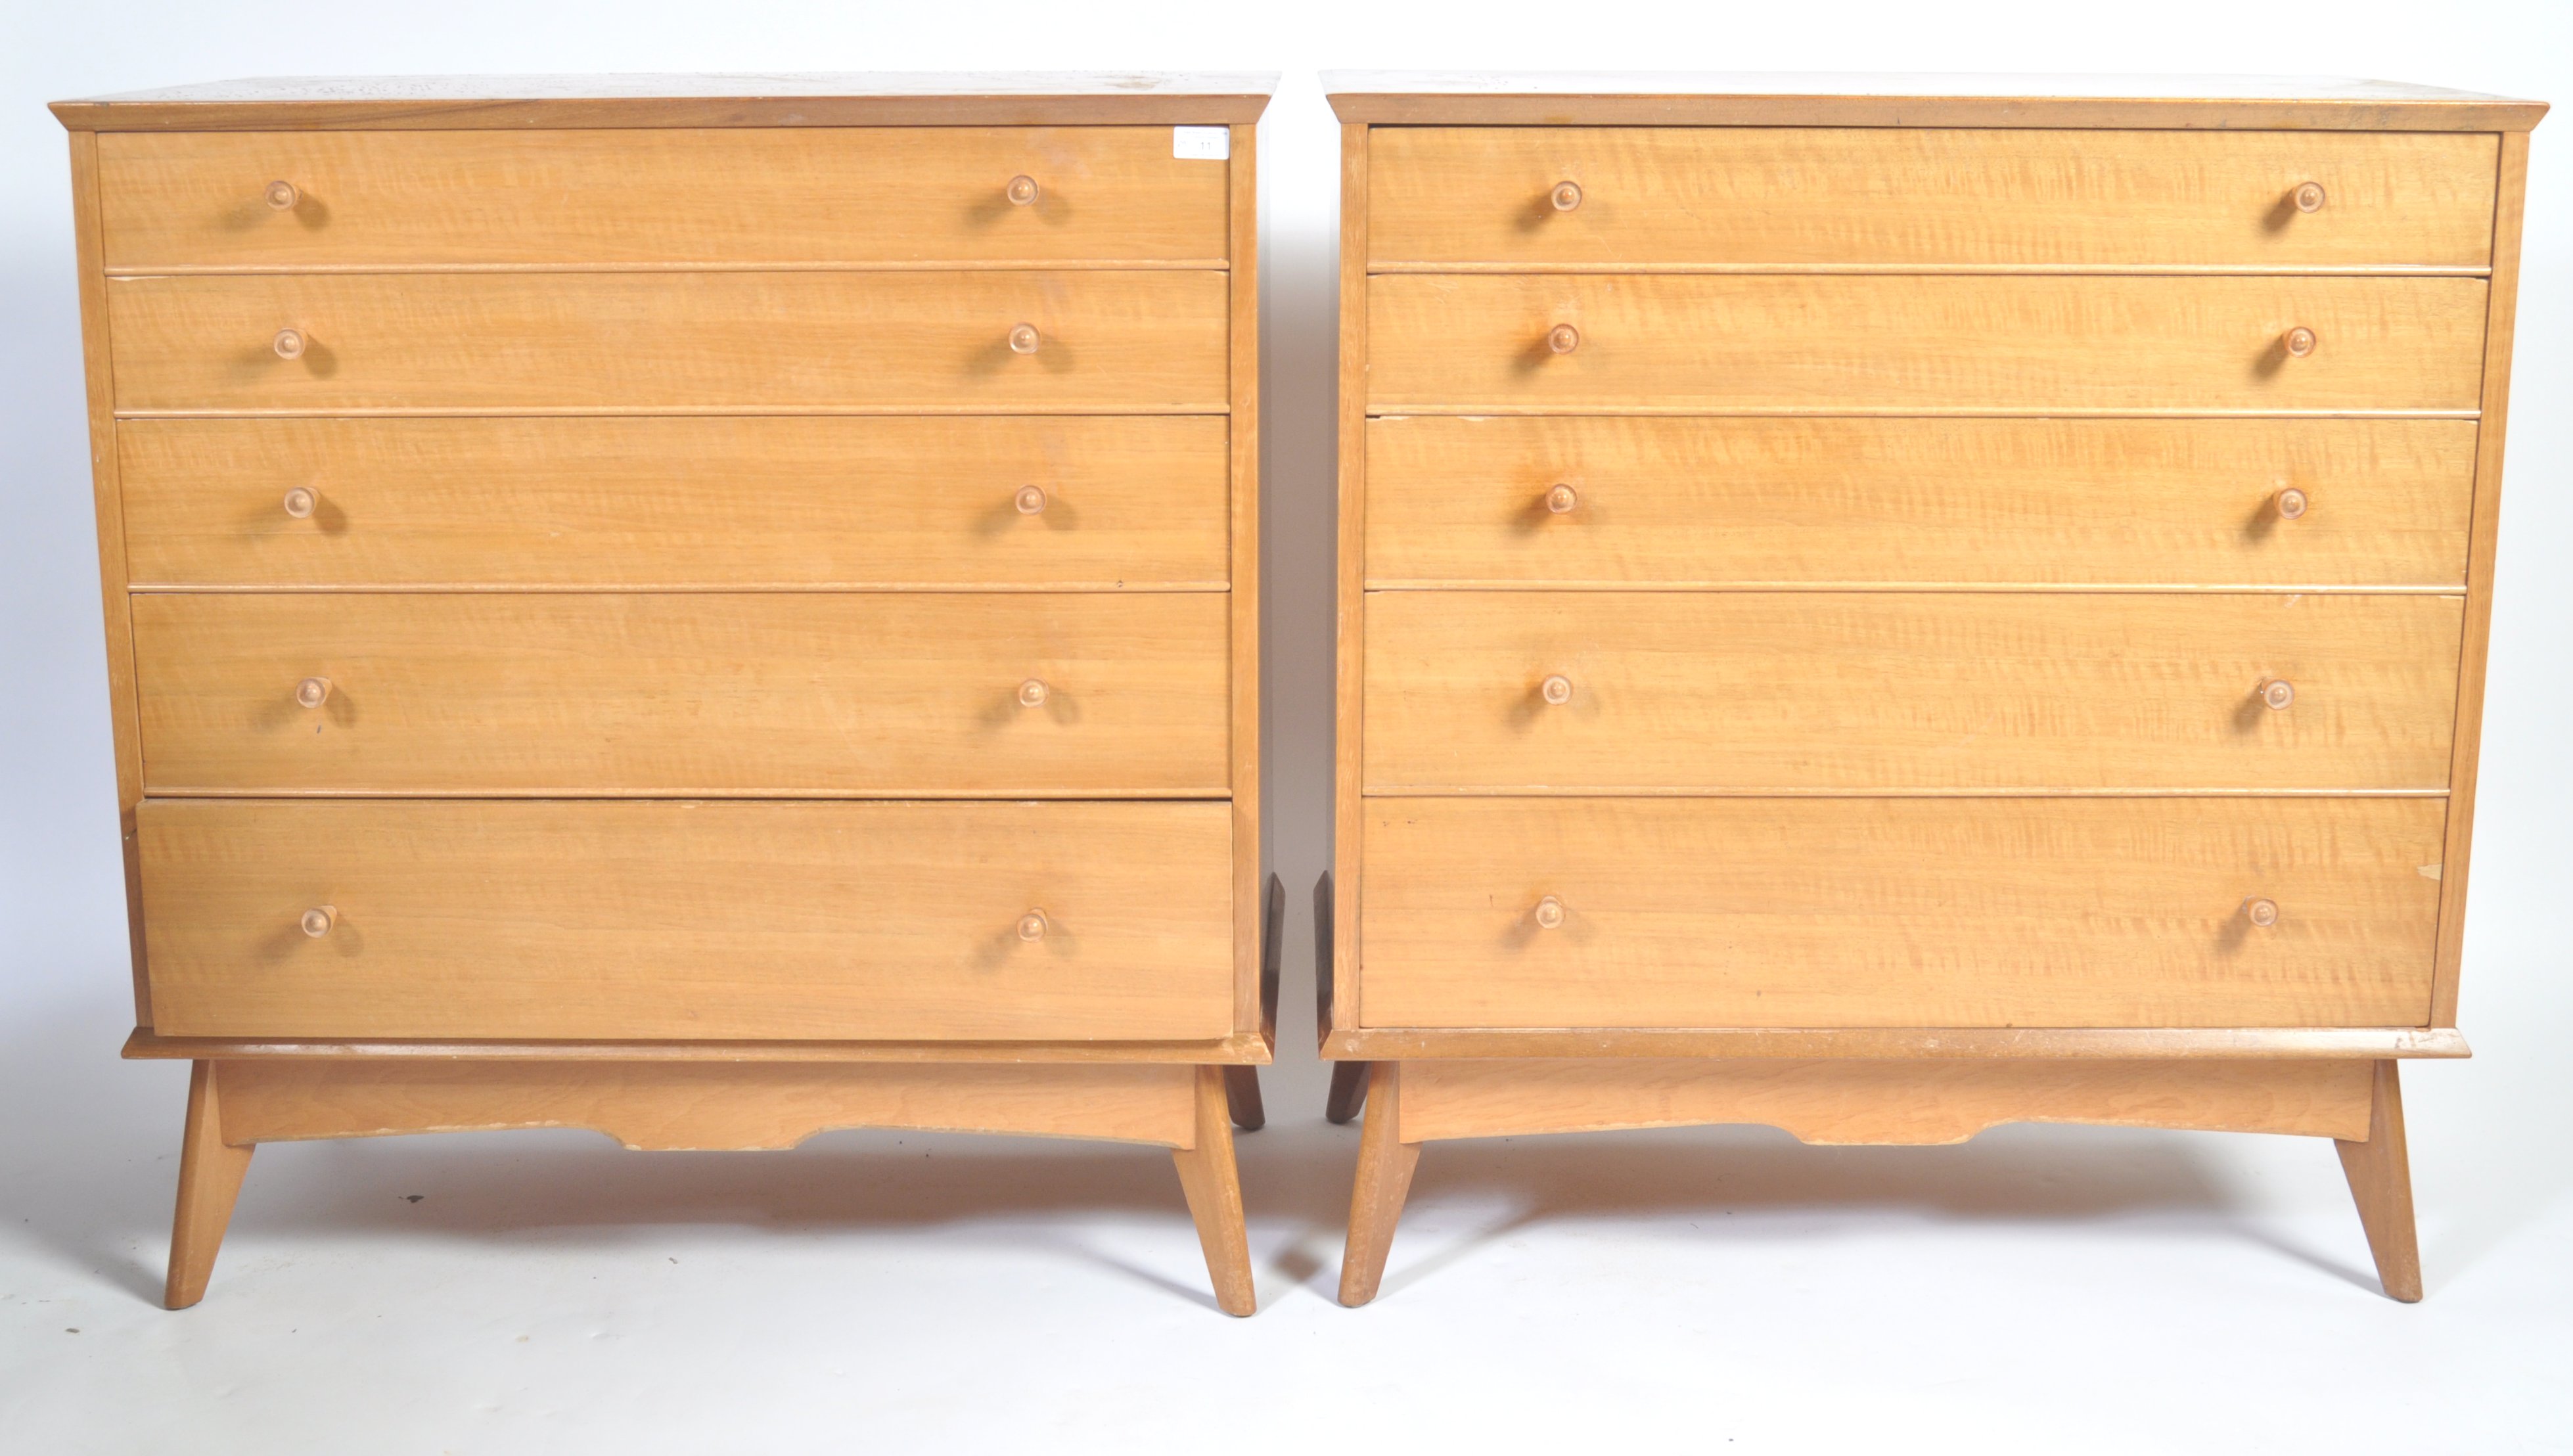 AC FURNITURE MID CENTURY CHESTS OF DRAWERS BY ALFRED COX - Image 3 of 7